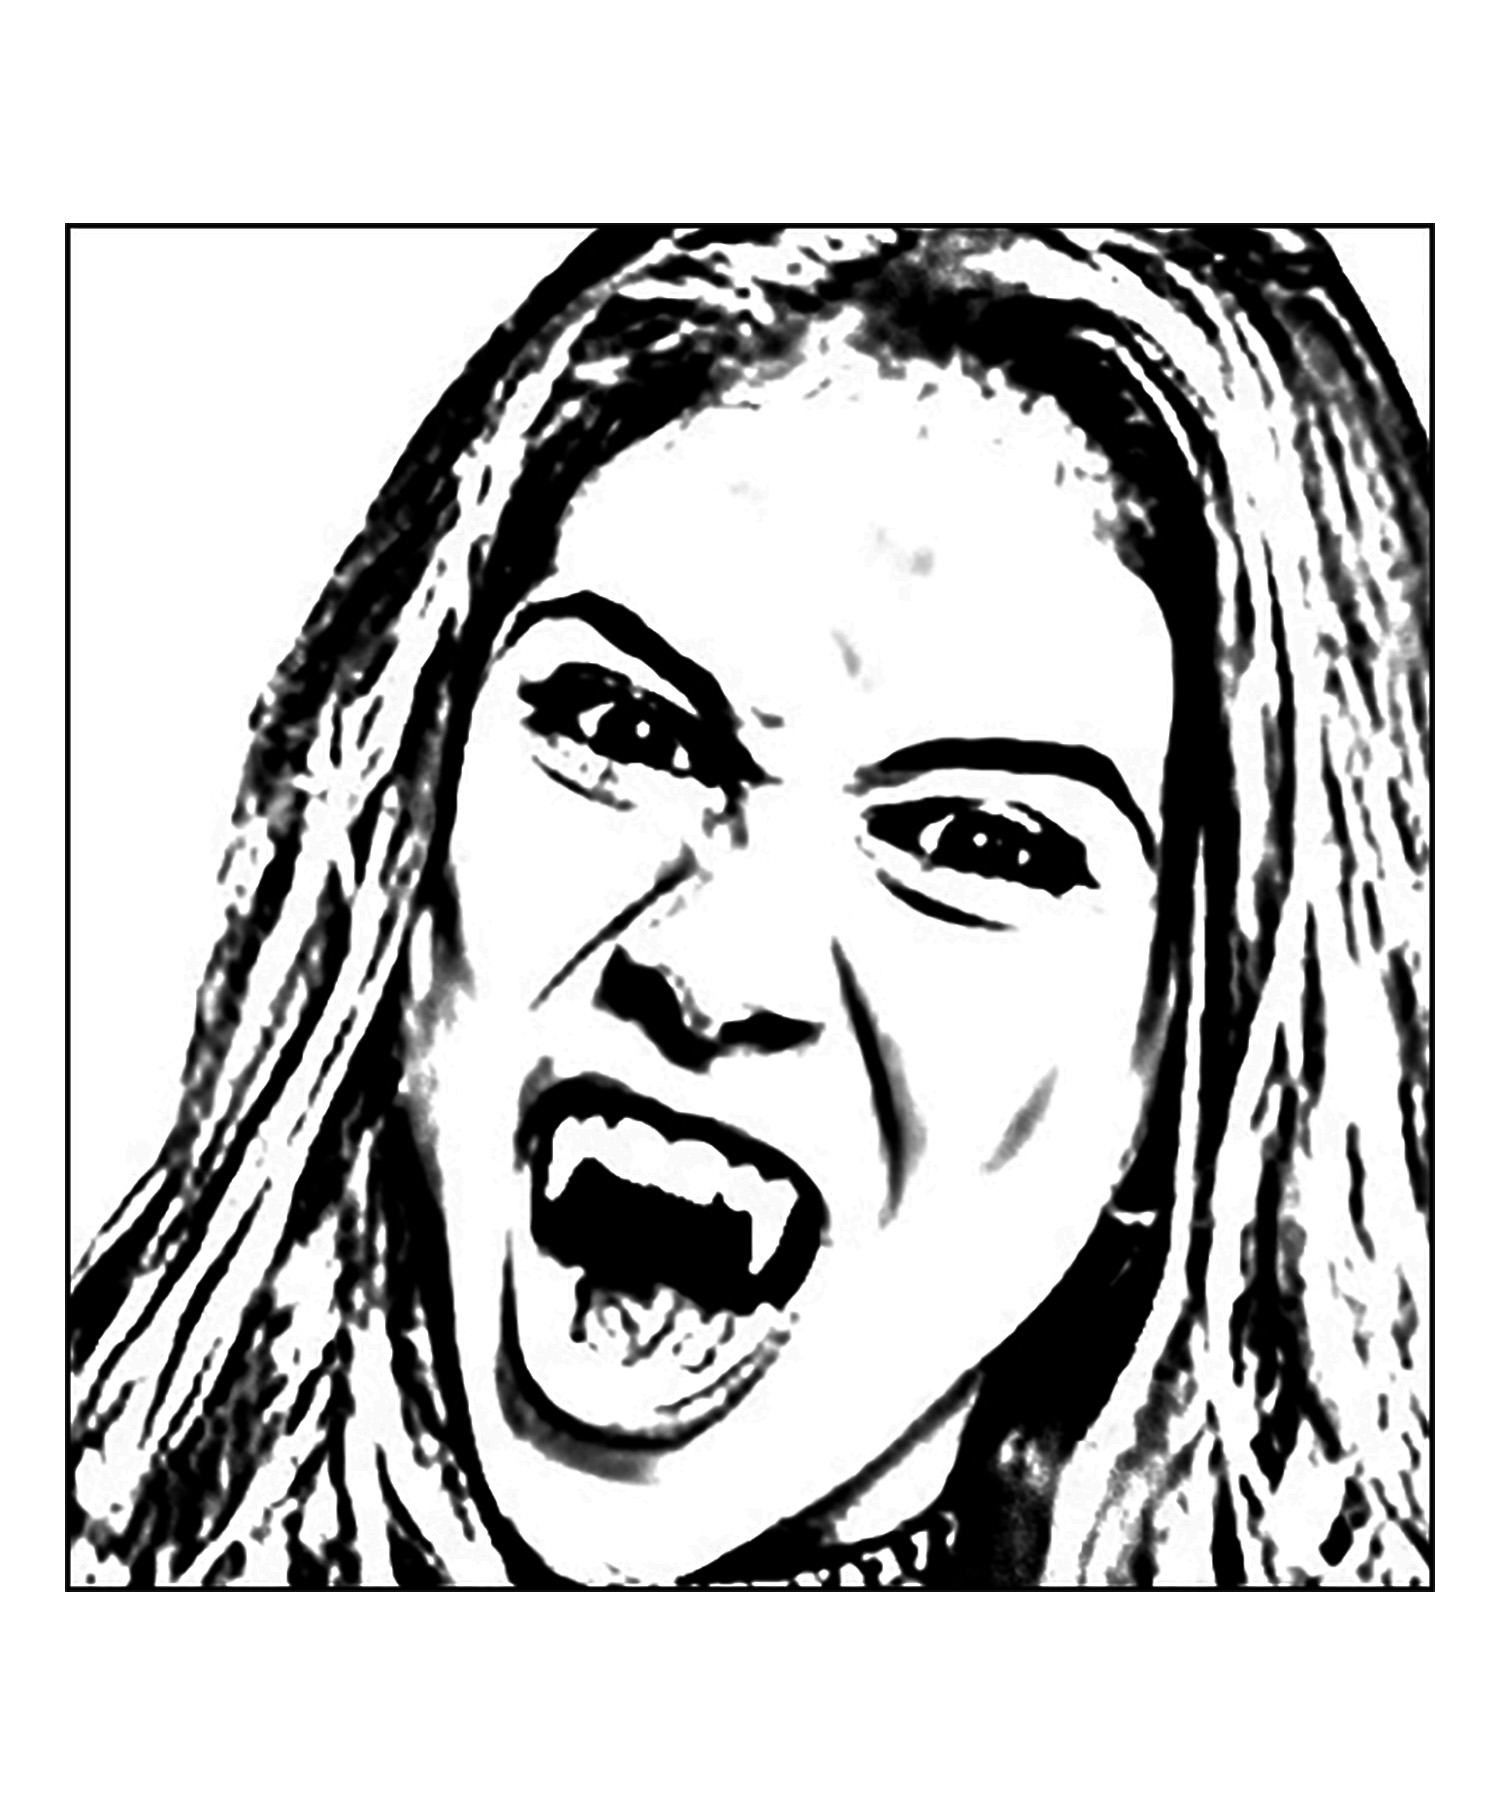 Free Chica Vampiro coloring page to print and color